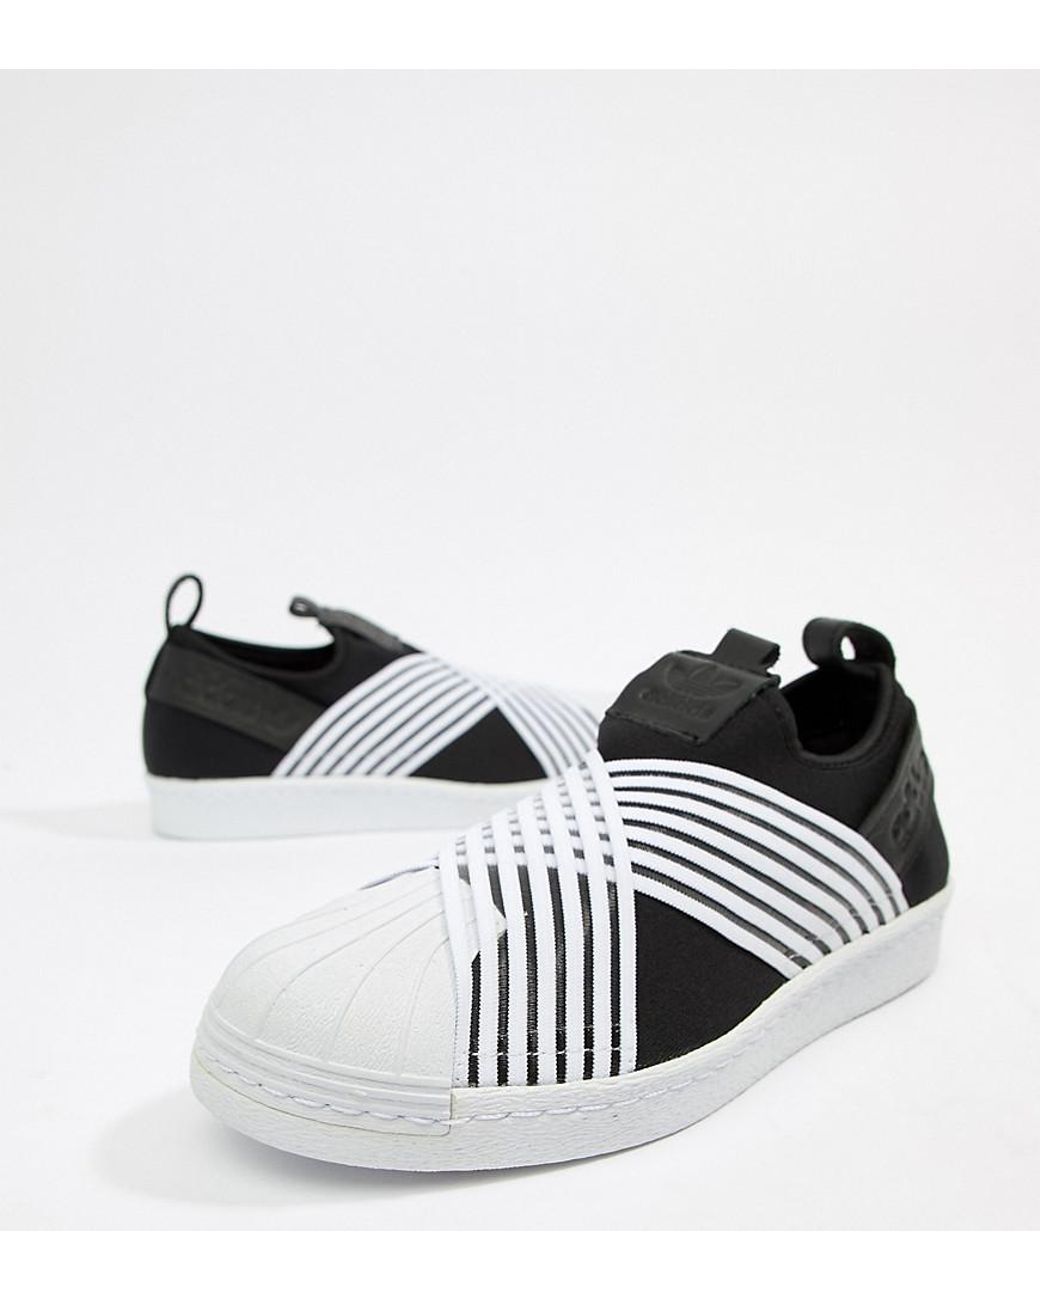 adidas Originals Women's Superstar Slip On Sneakers In Black And White